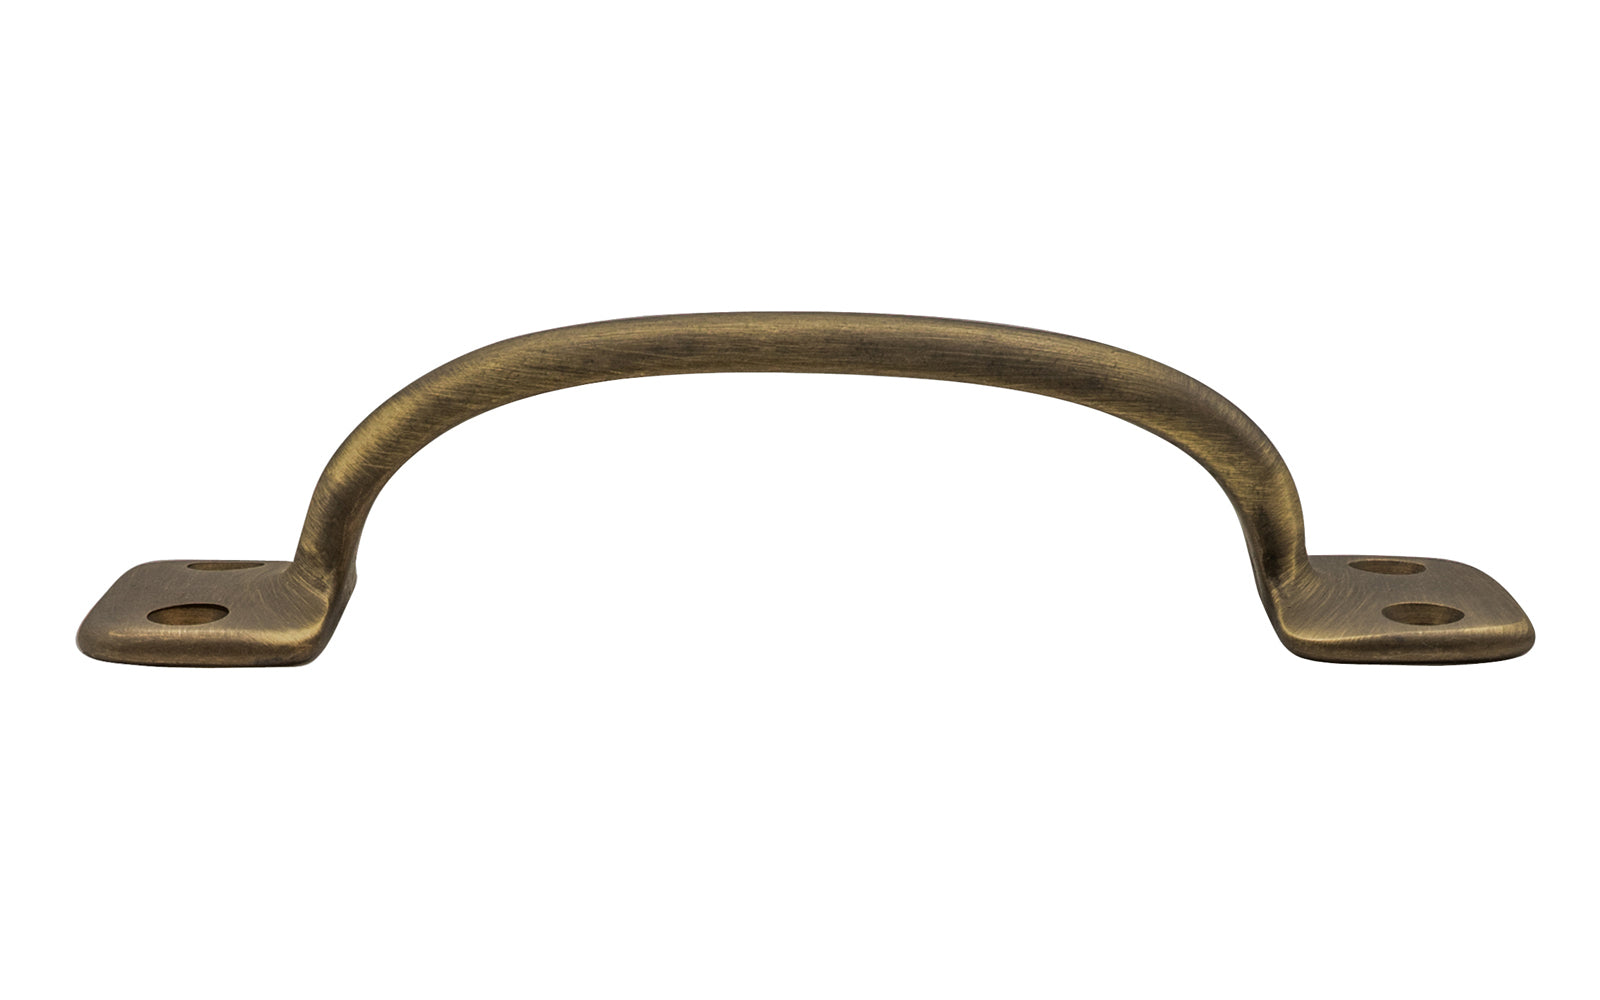 Vintage-style Hardware · Classic Solid Brass Handle Pull ~ 4" On Centers. Versatile handle is great for sash windows, cabinets, drawers, file cabinets. Arts & Crafts handle pull. Antique Brass Finish.